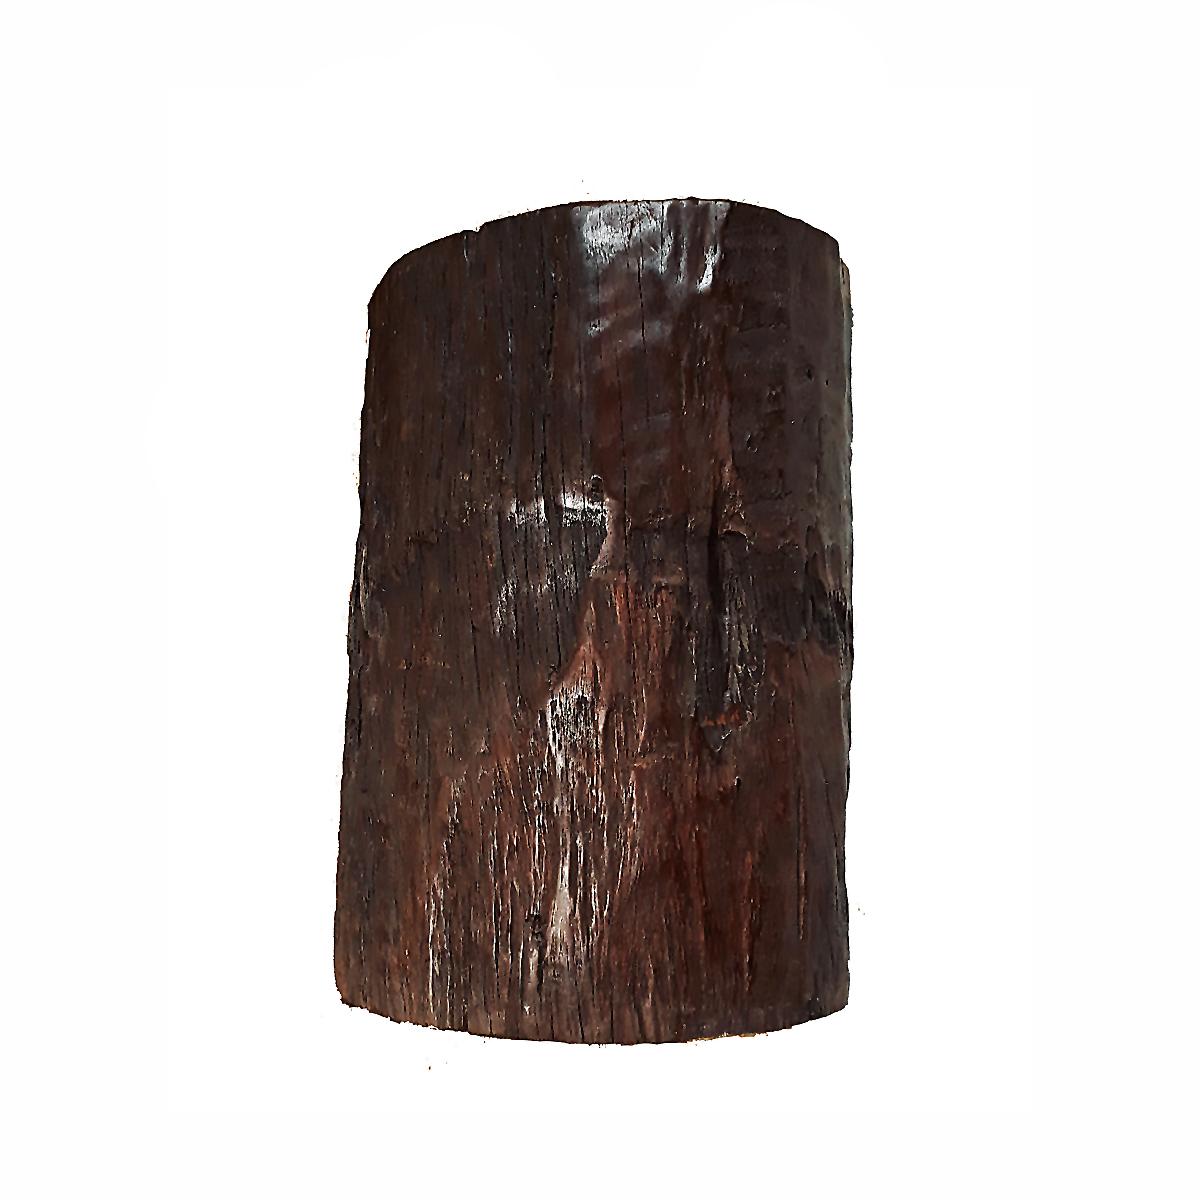 A solid wood tree trunk repurposed into a singular end or side table. 
Dark brown finish, polished smooth top. Naturally carved opening on top. 
Can also be used as a stool or pedestal. 
 